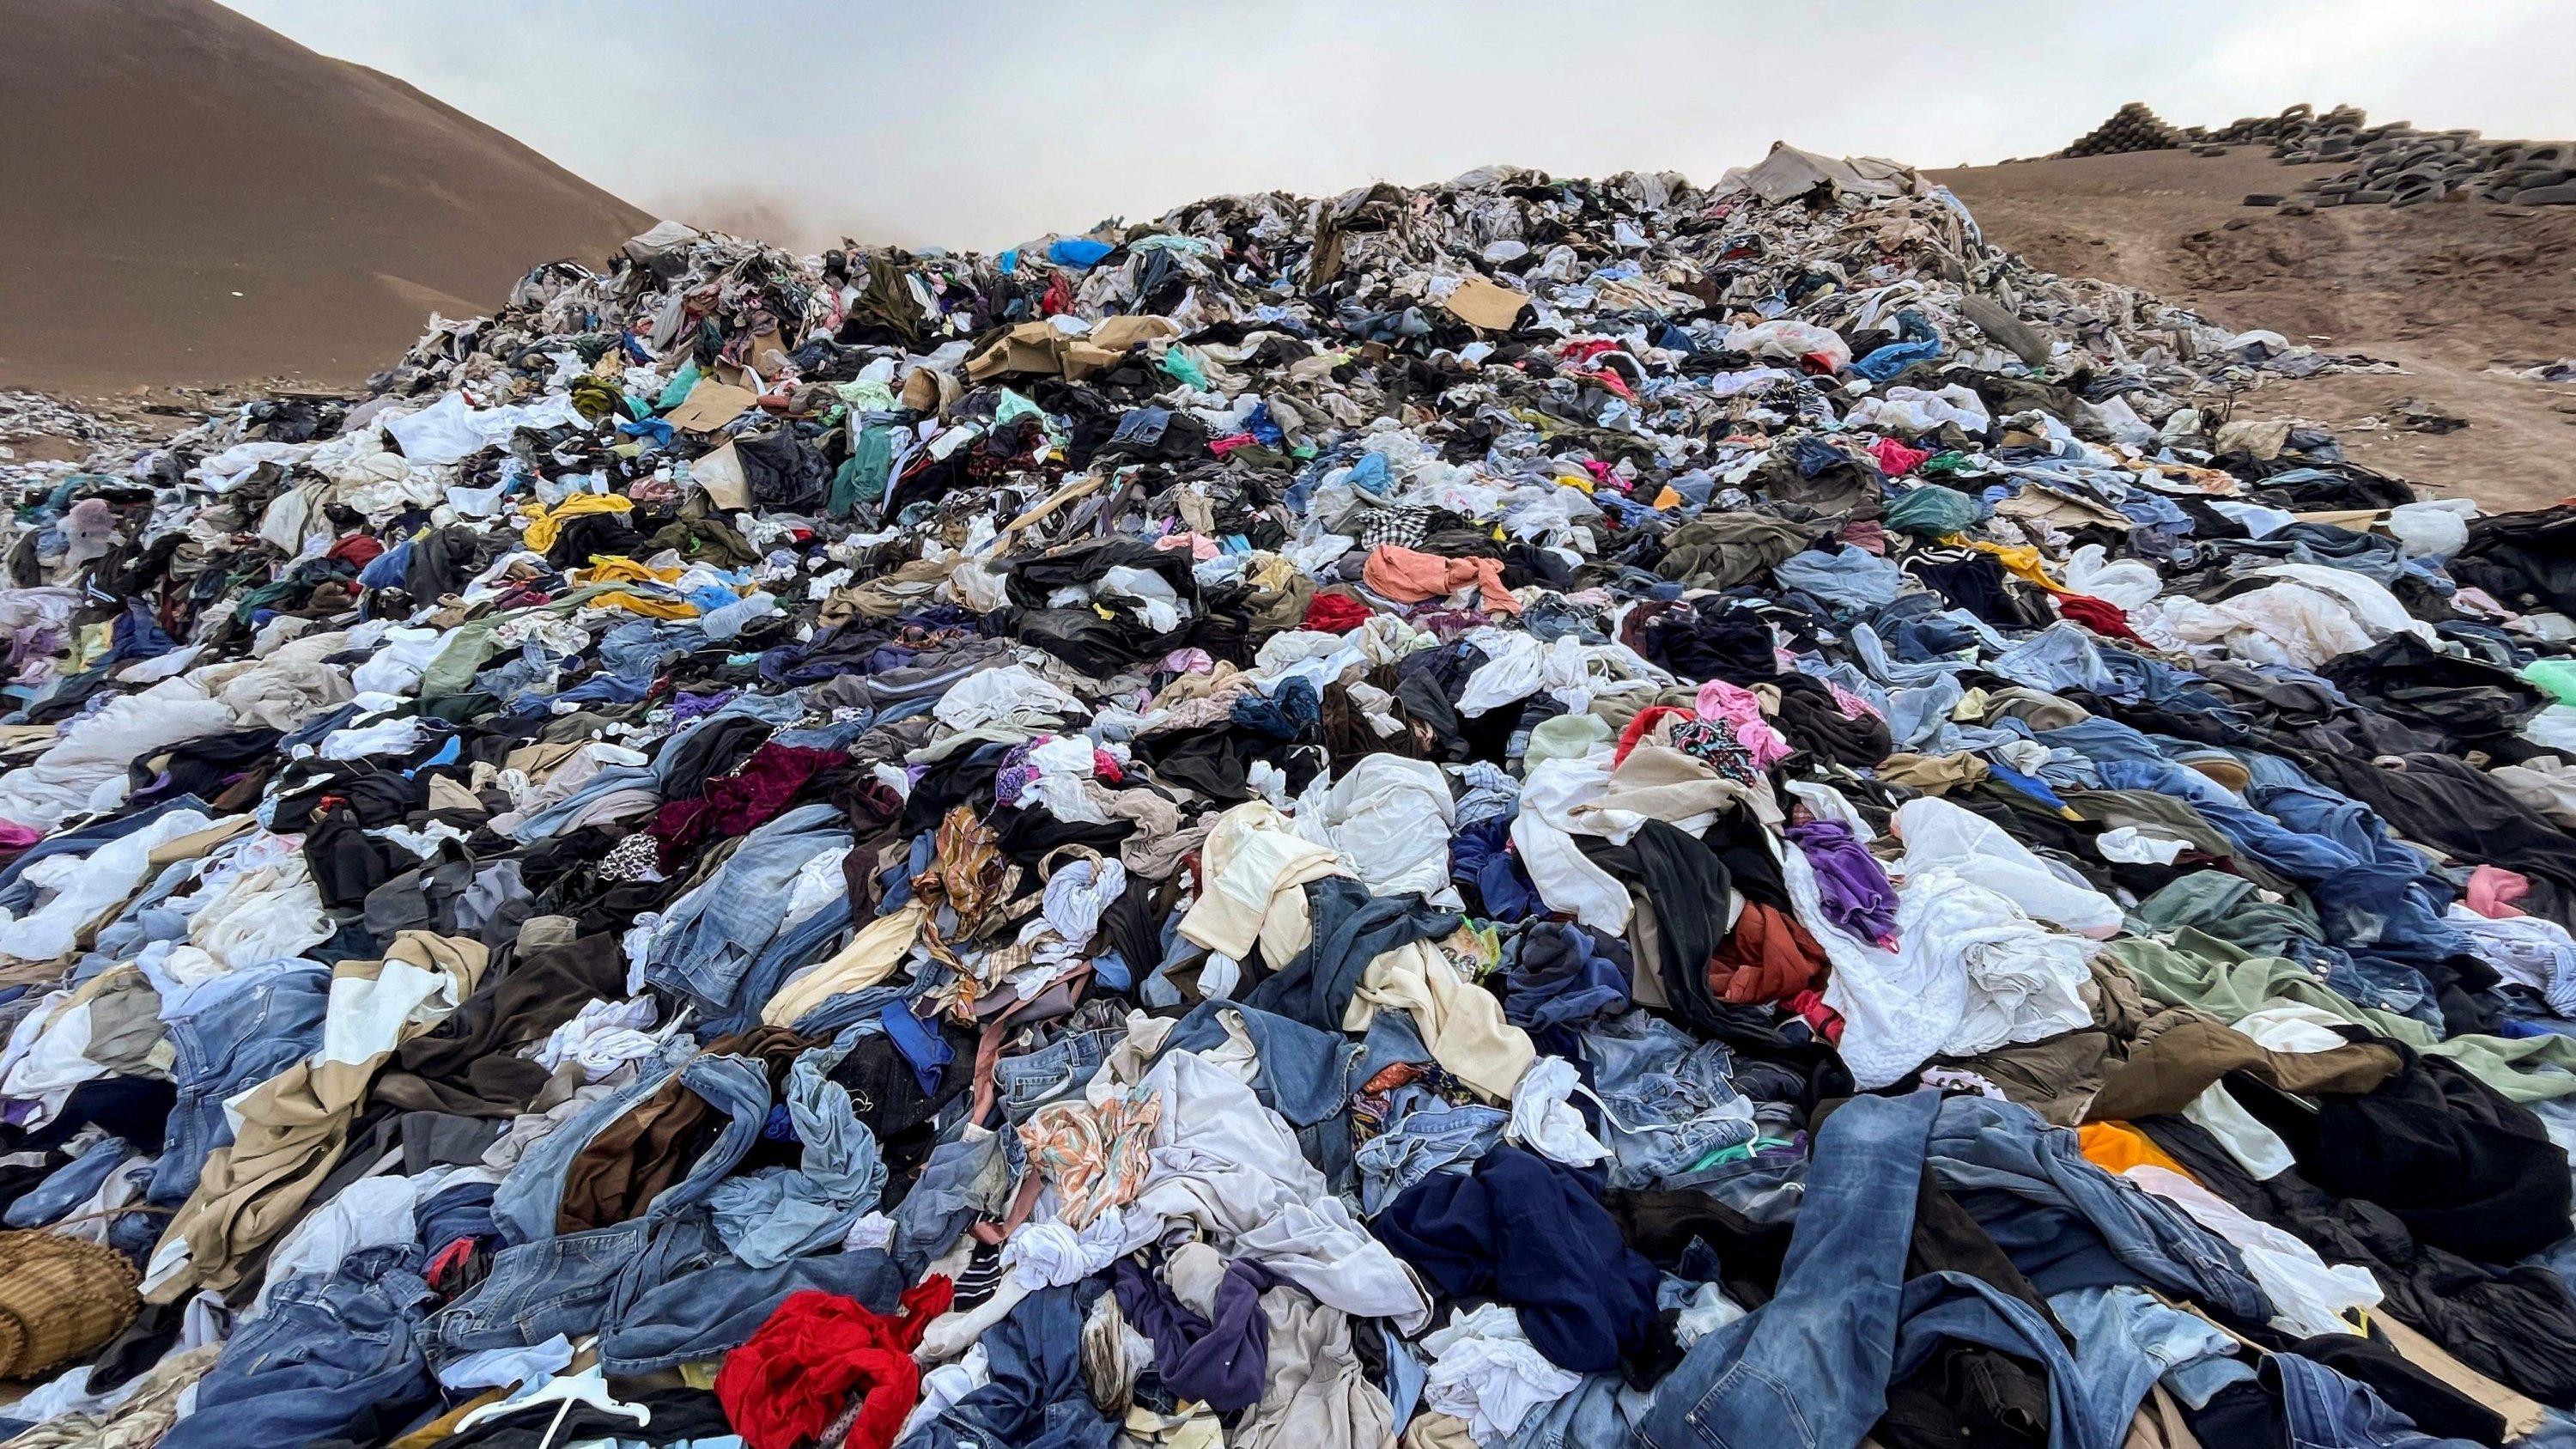 A view of used clothes discarded in the Atacama desert, in Alto Hospicio, Iquique, Chile, Sept. 26, 2021. (AFP Photo)